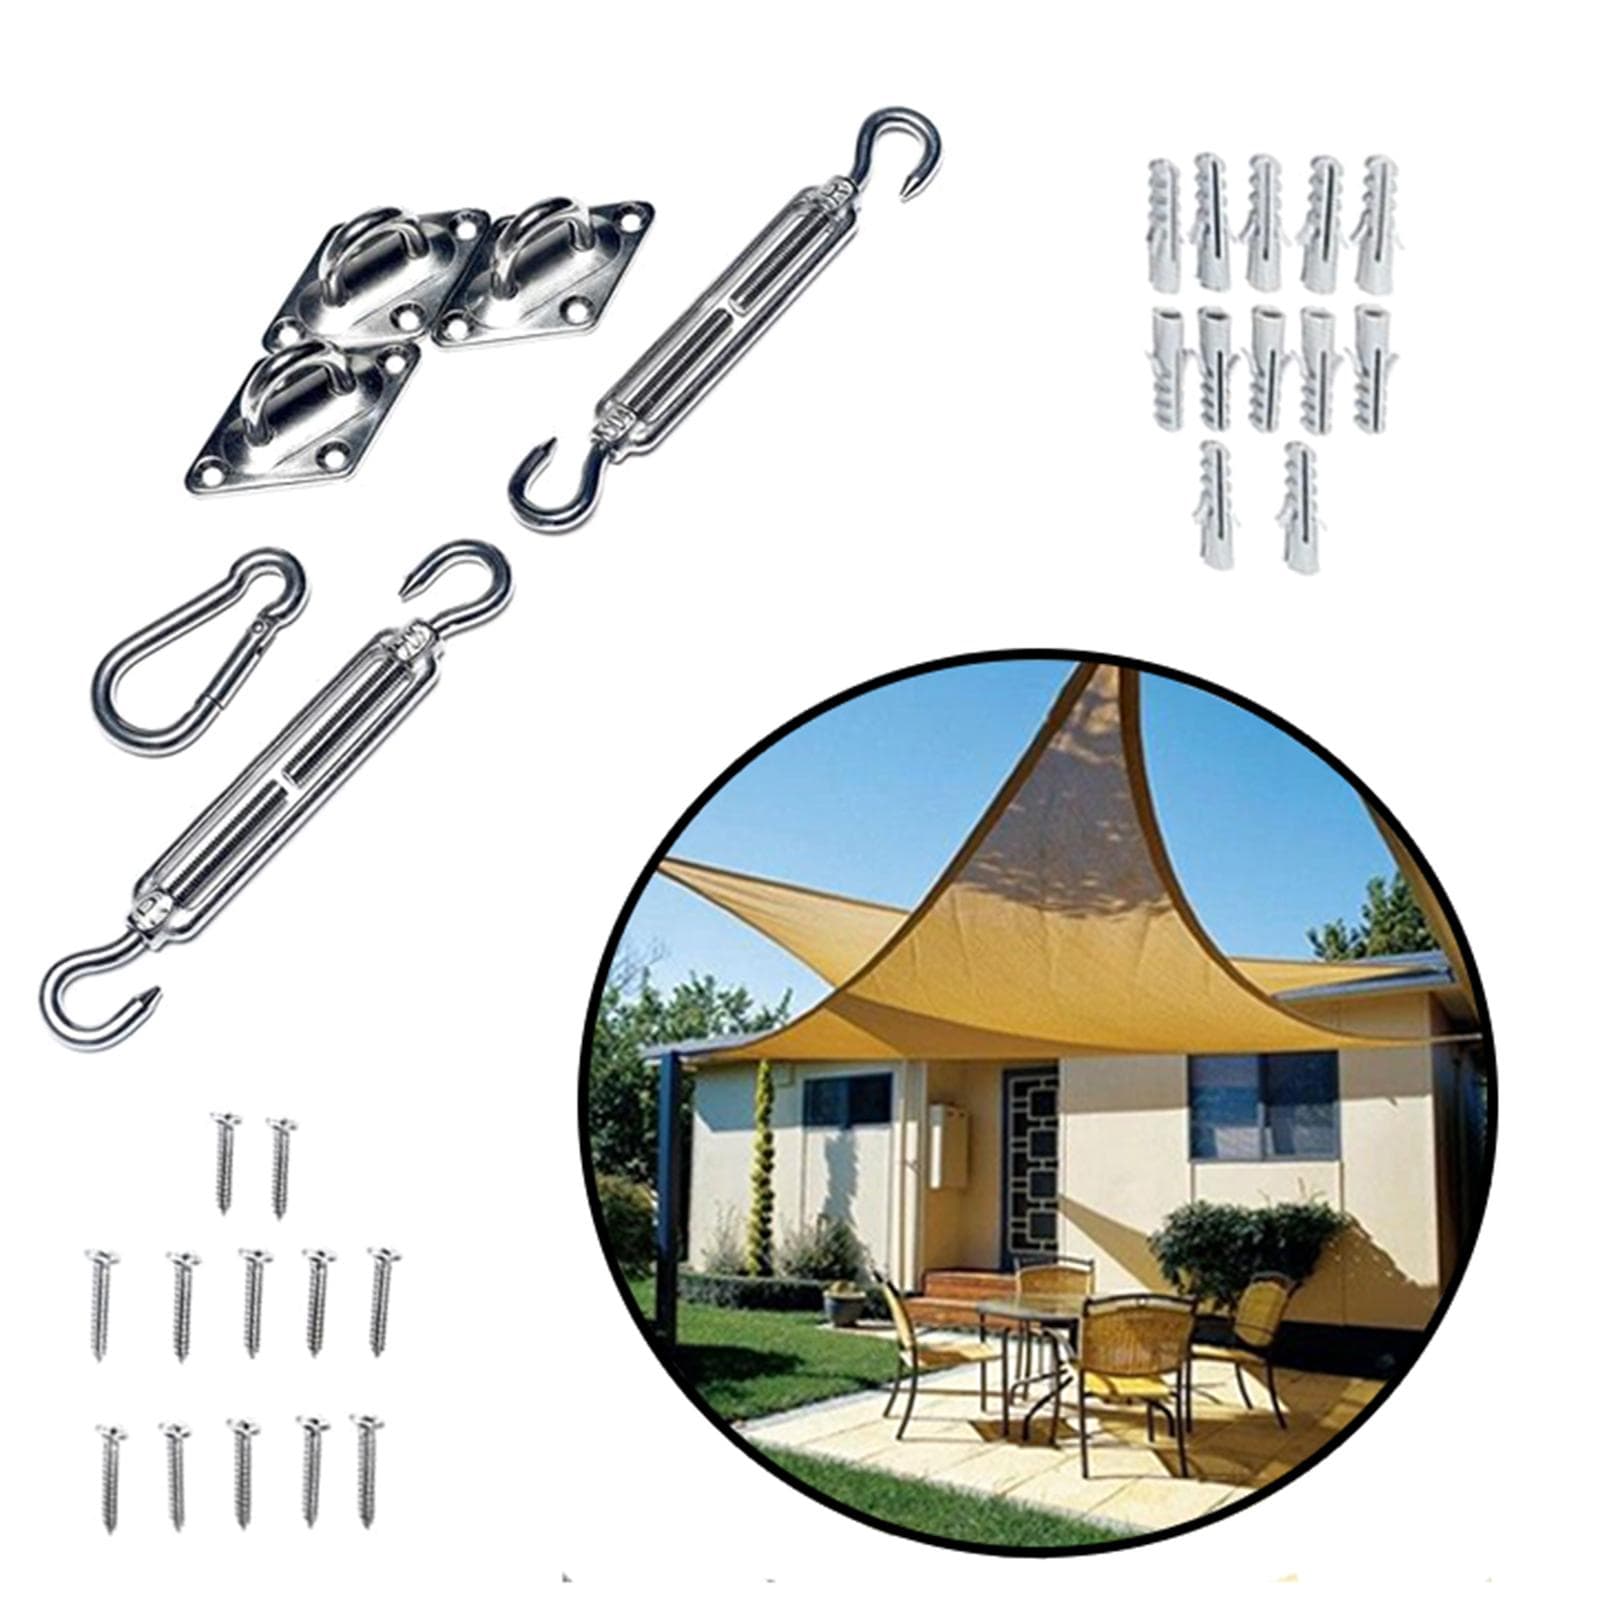 Stainless Steel Triangle Sun Shade Sail Installation Tools Kit - Silver BKDP_SAIL_TRI_TOOL1_6